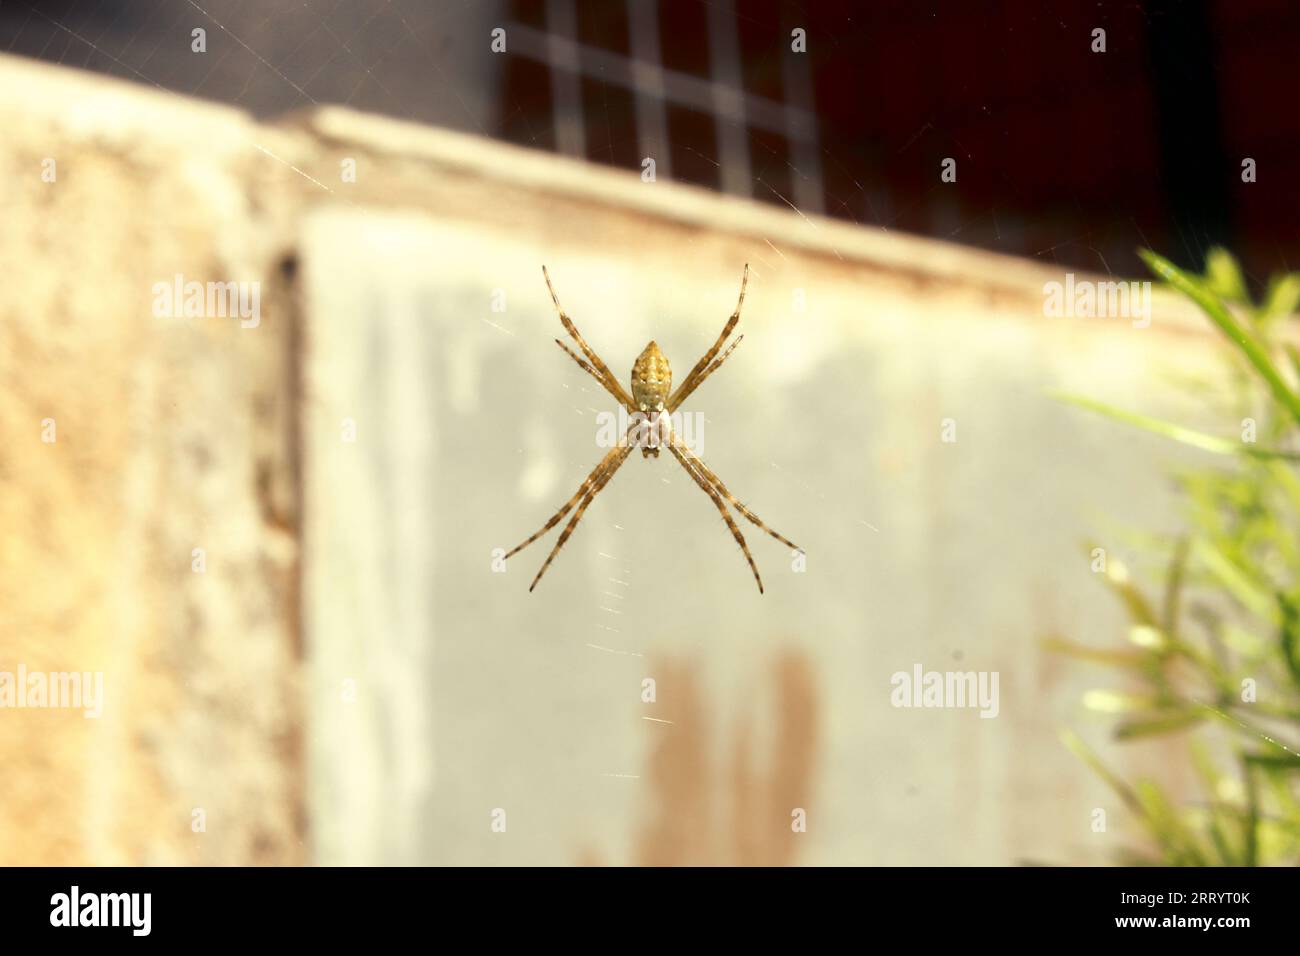 Young garden spider of the Argiope Argentata species, popularly known as the Silver Spider, in the center of its web, yellow, brown and silver colors Stock Photo